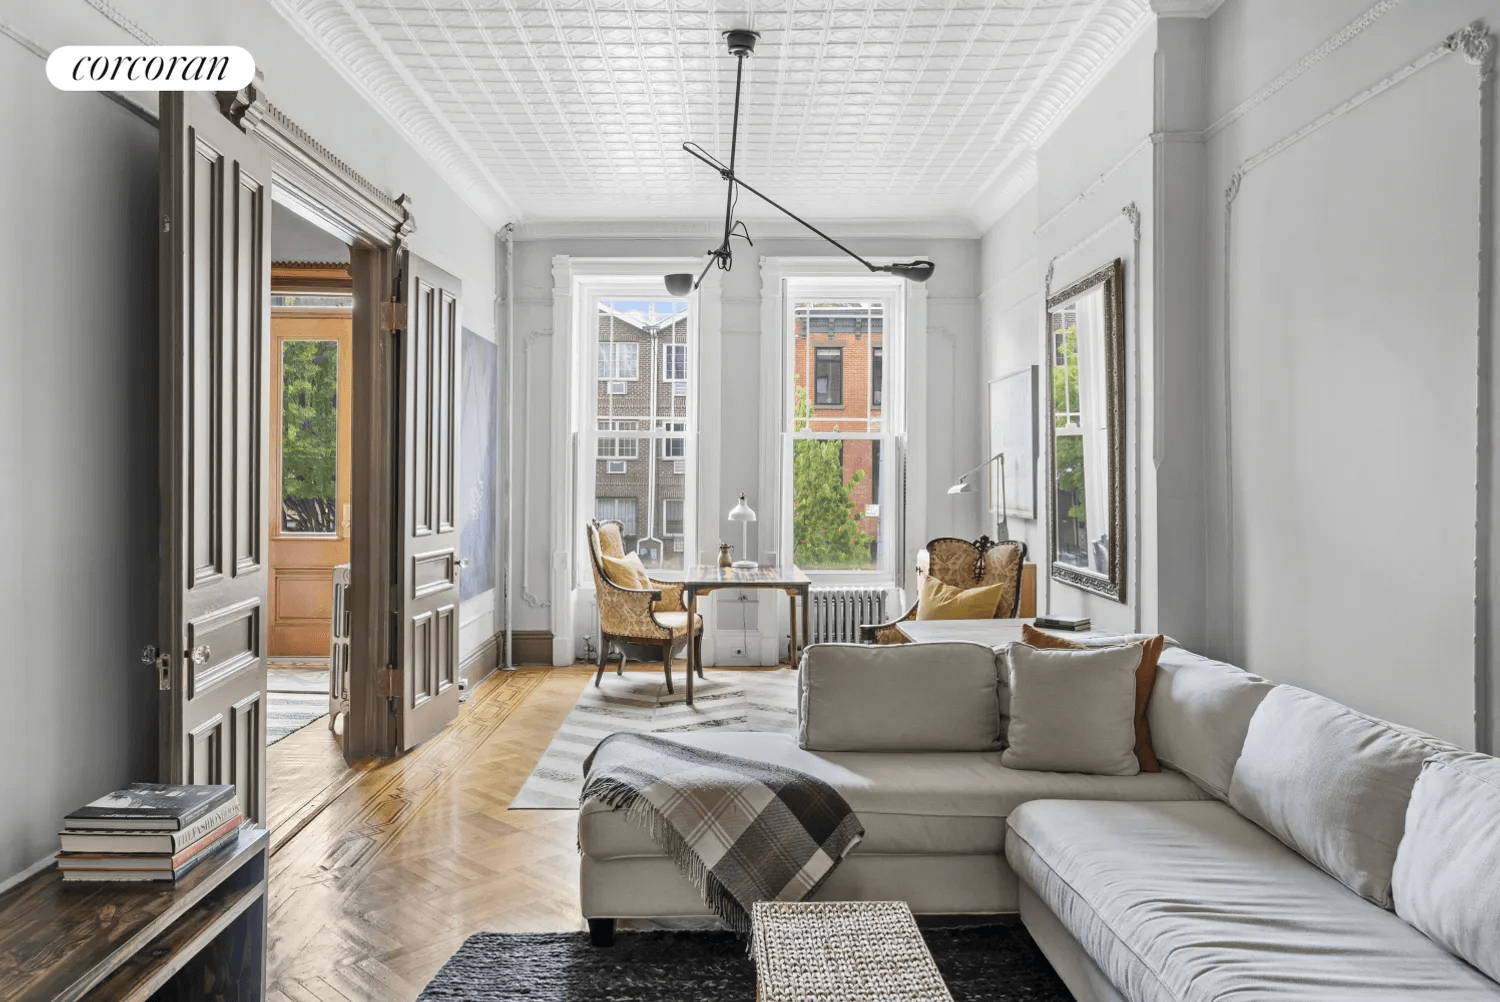 brooklyn open houses - parlor with painted woodwork and tin ceiling